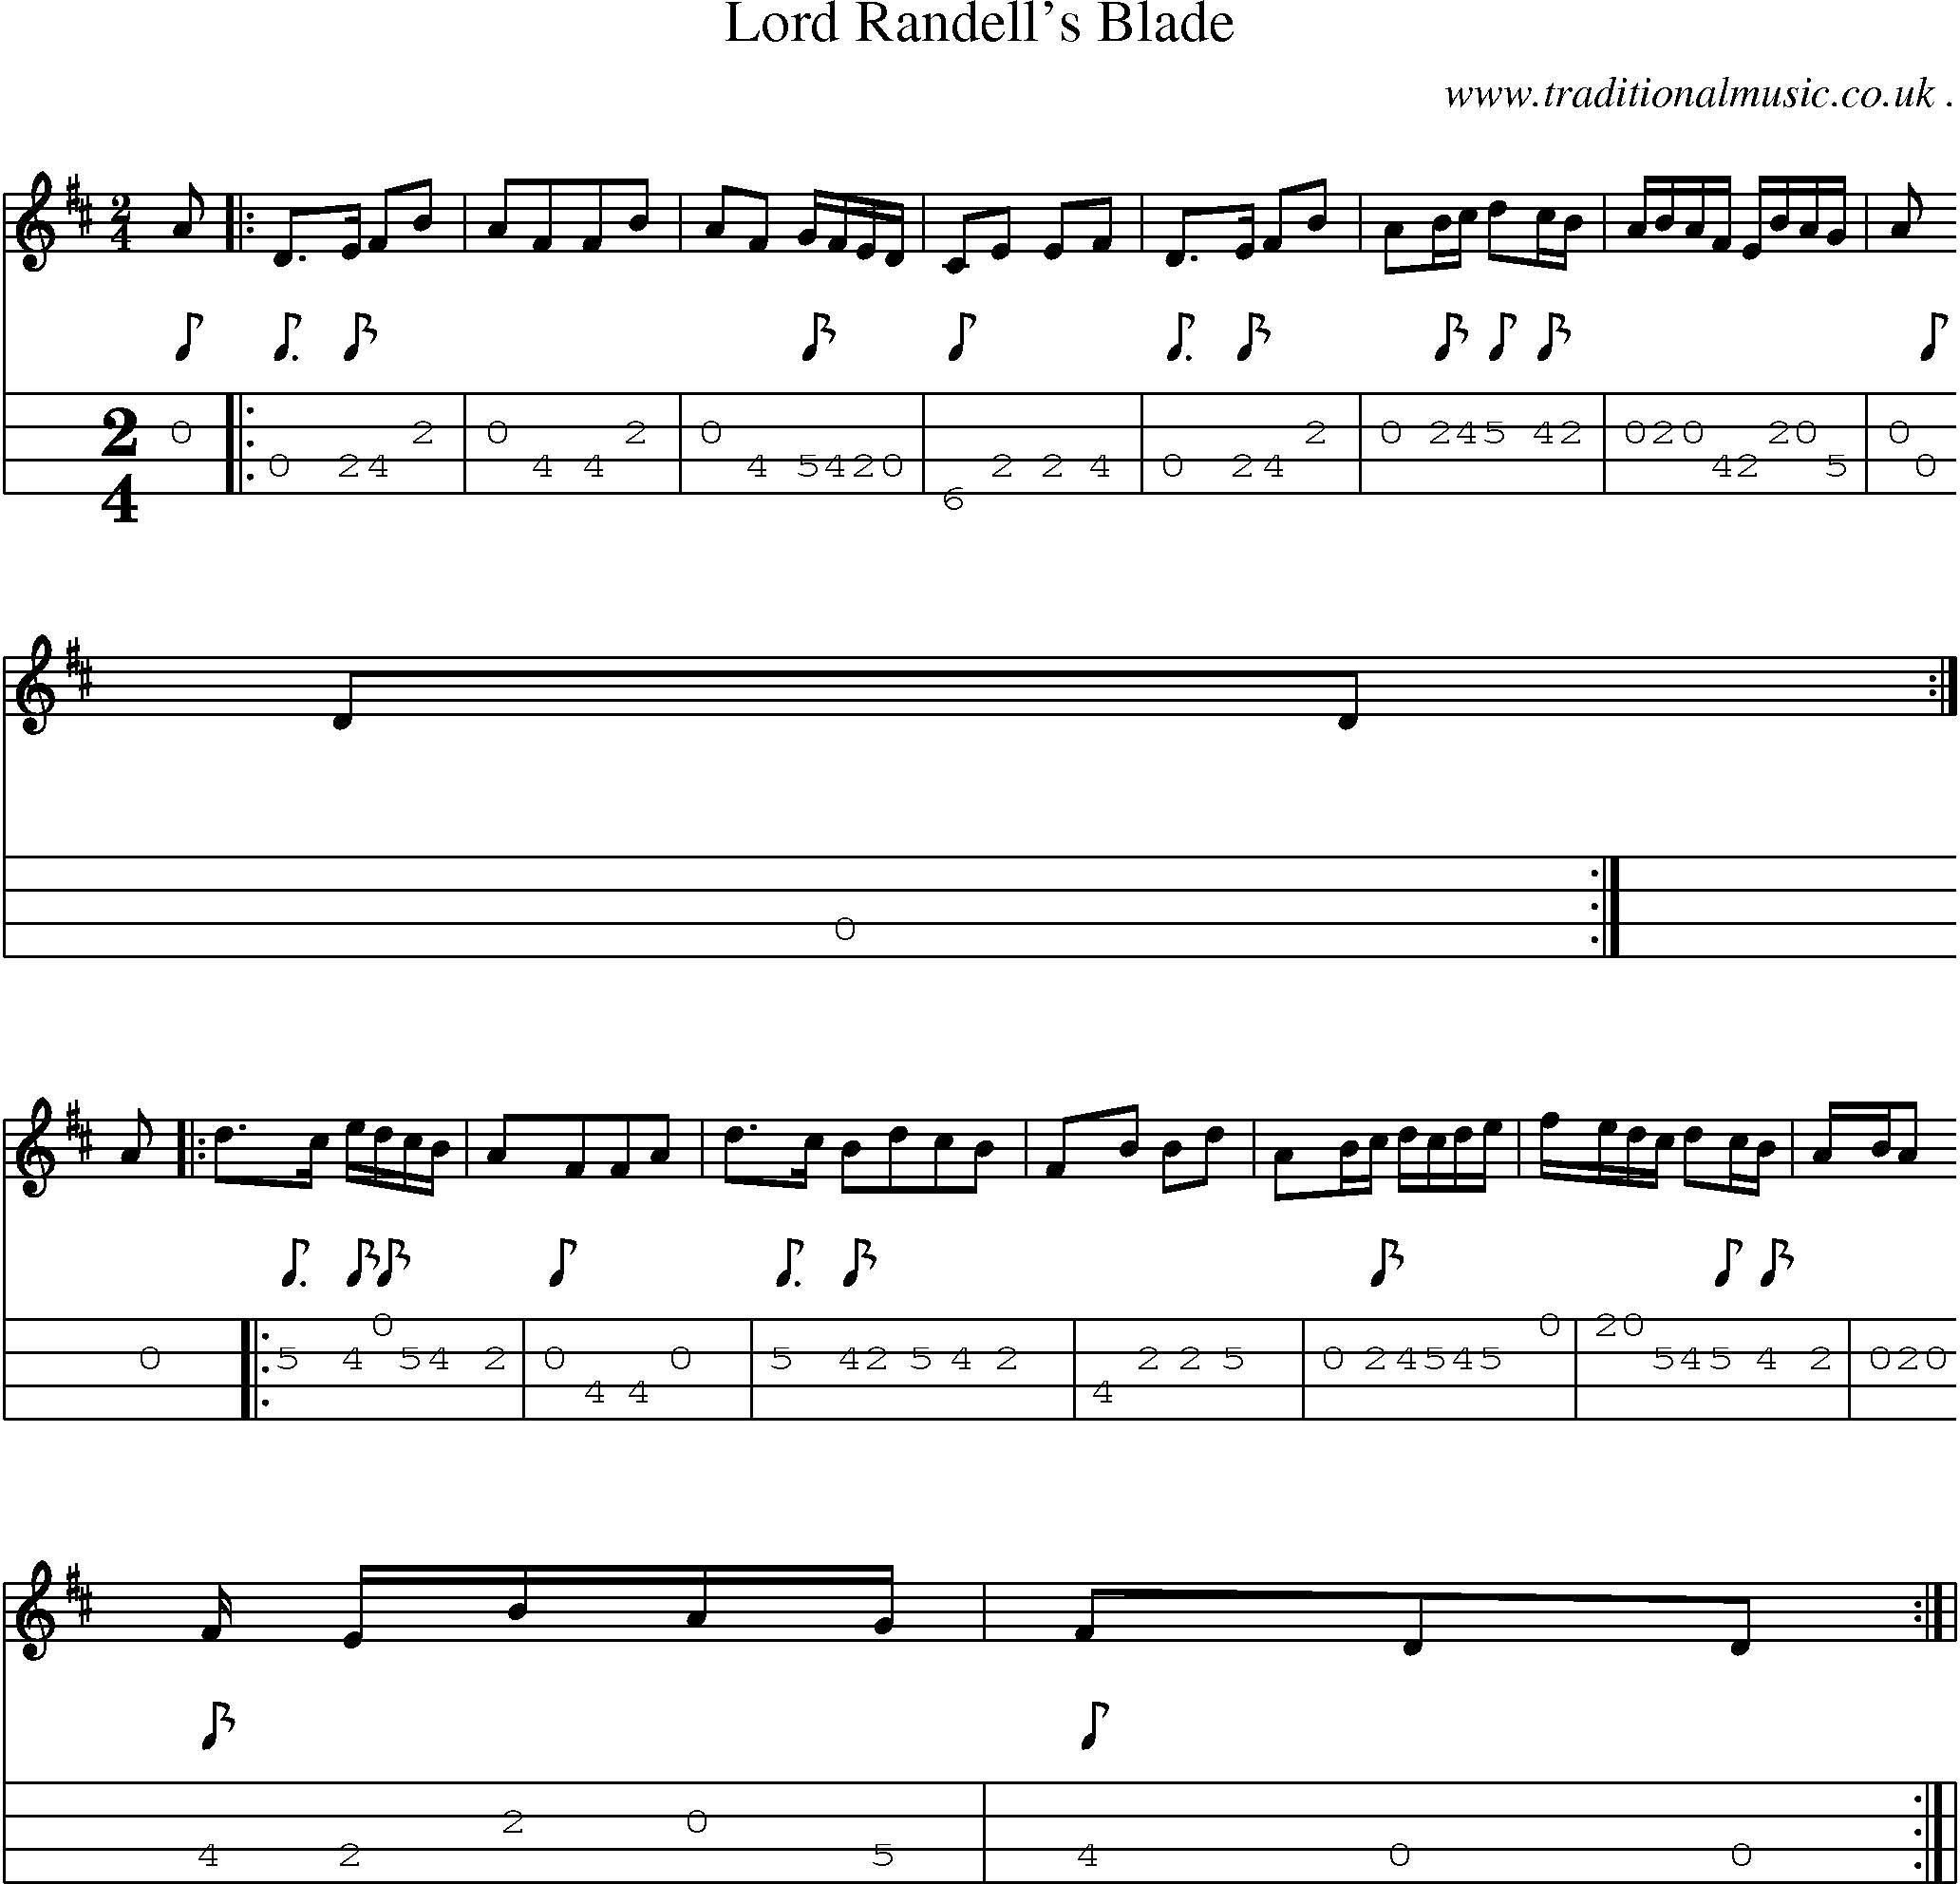 Sheet-music  score, Chords and Mandolin Tabs for Lord Randells Blade